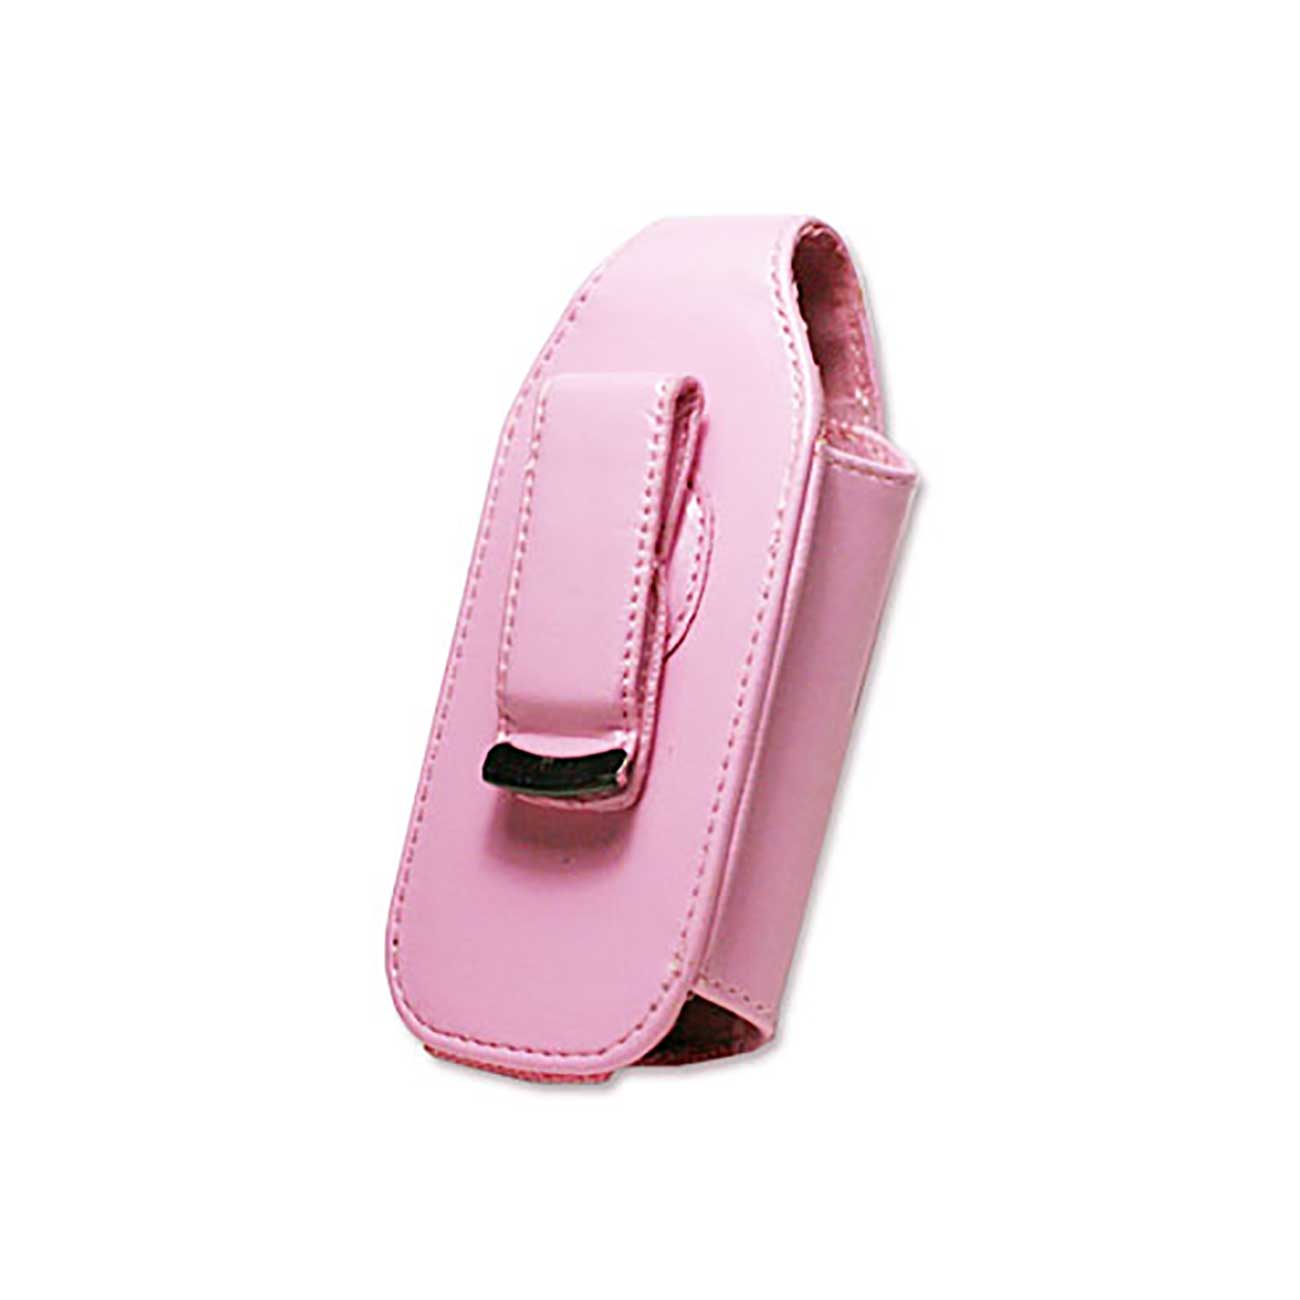 Pouch/Phone Holster Vertical Vp45 S Pink Color